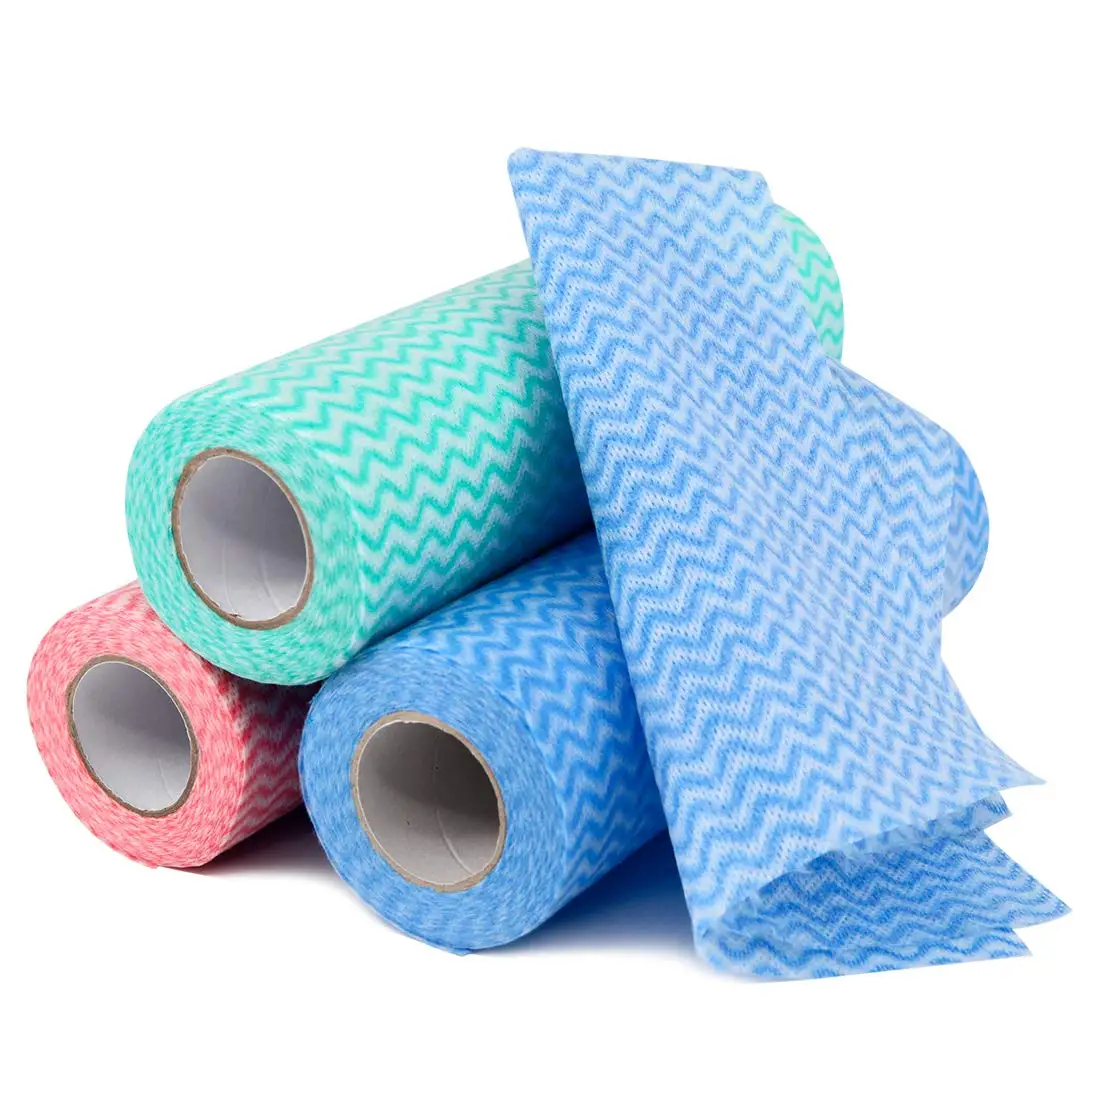 

20*30cm washable super cleaning pano de limpeza for kitchen, Yellow, blue, pink, green etc.